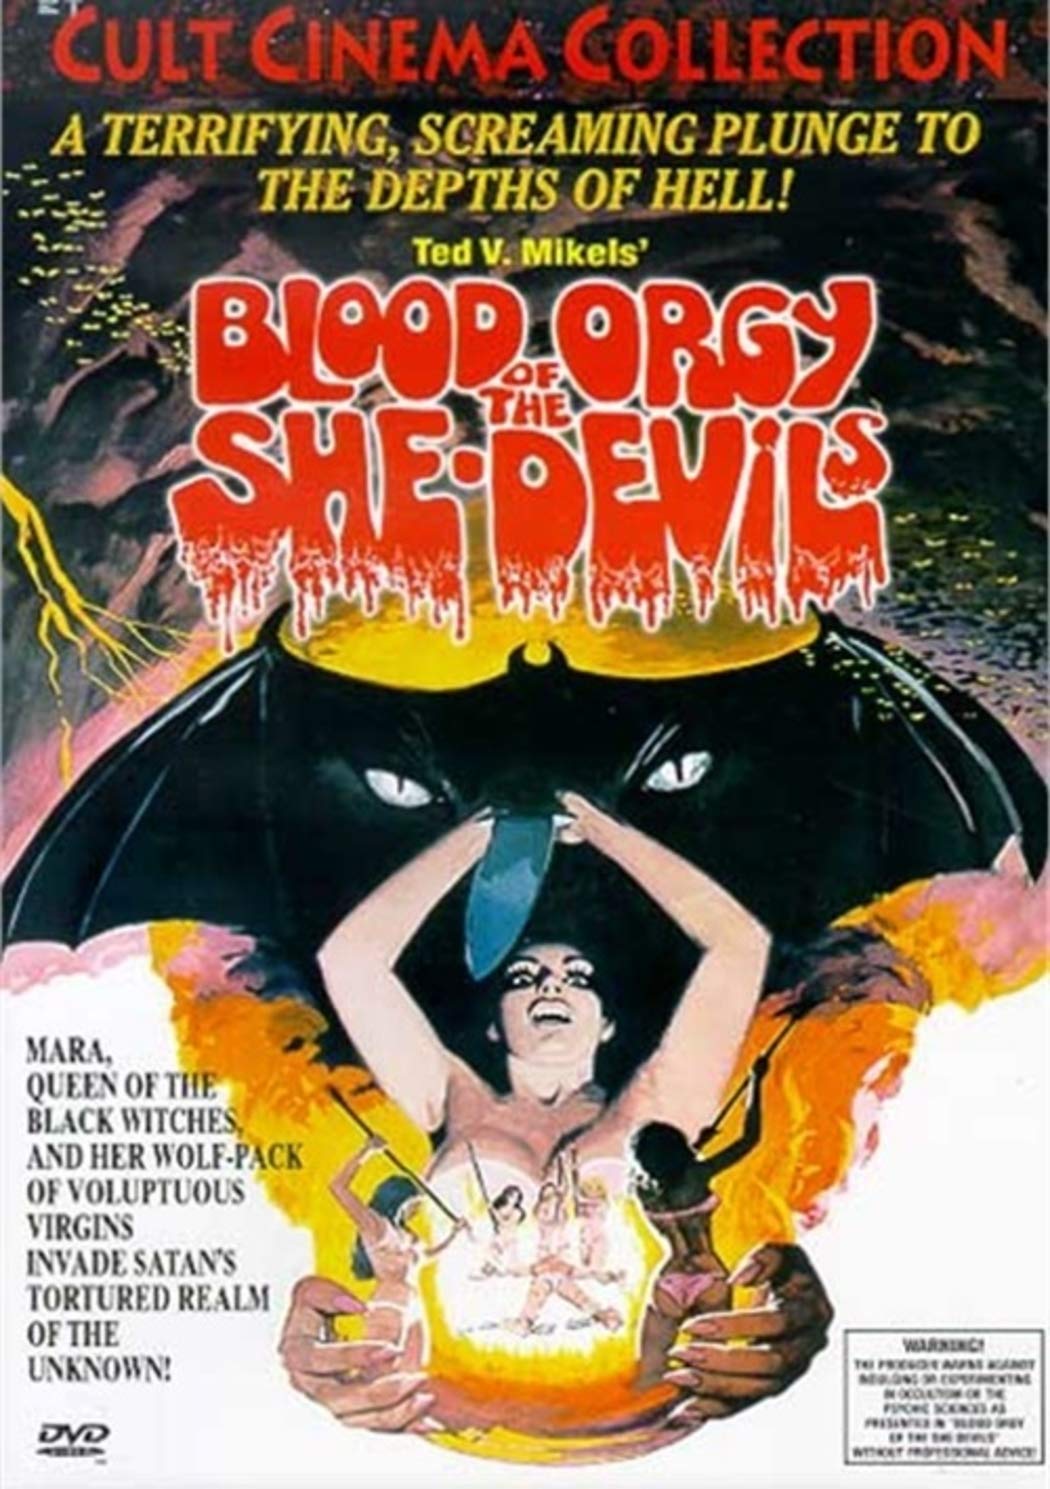 BLOOD ORGY OF THE SHE-DEVILS DVD